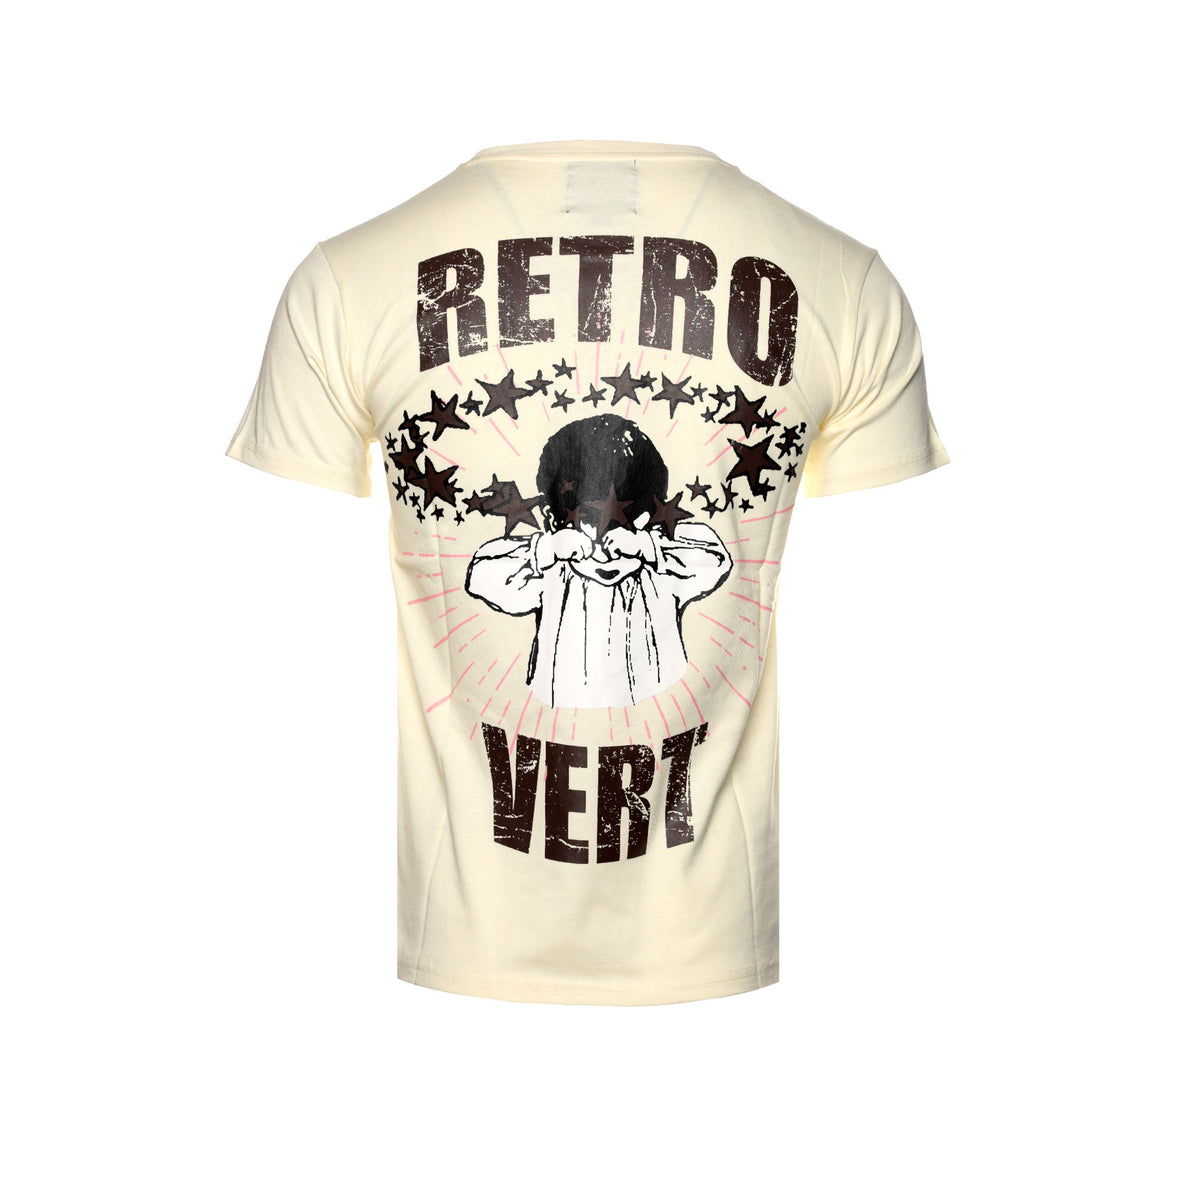 Retrovert "Cry Baby" Men's Beige / Red SS Graphic Tee